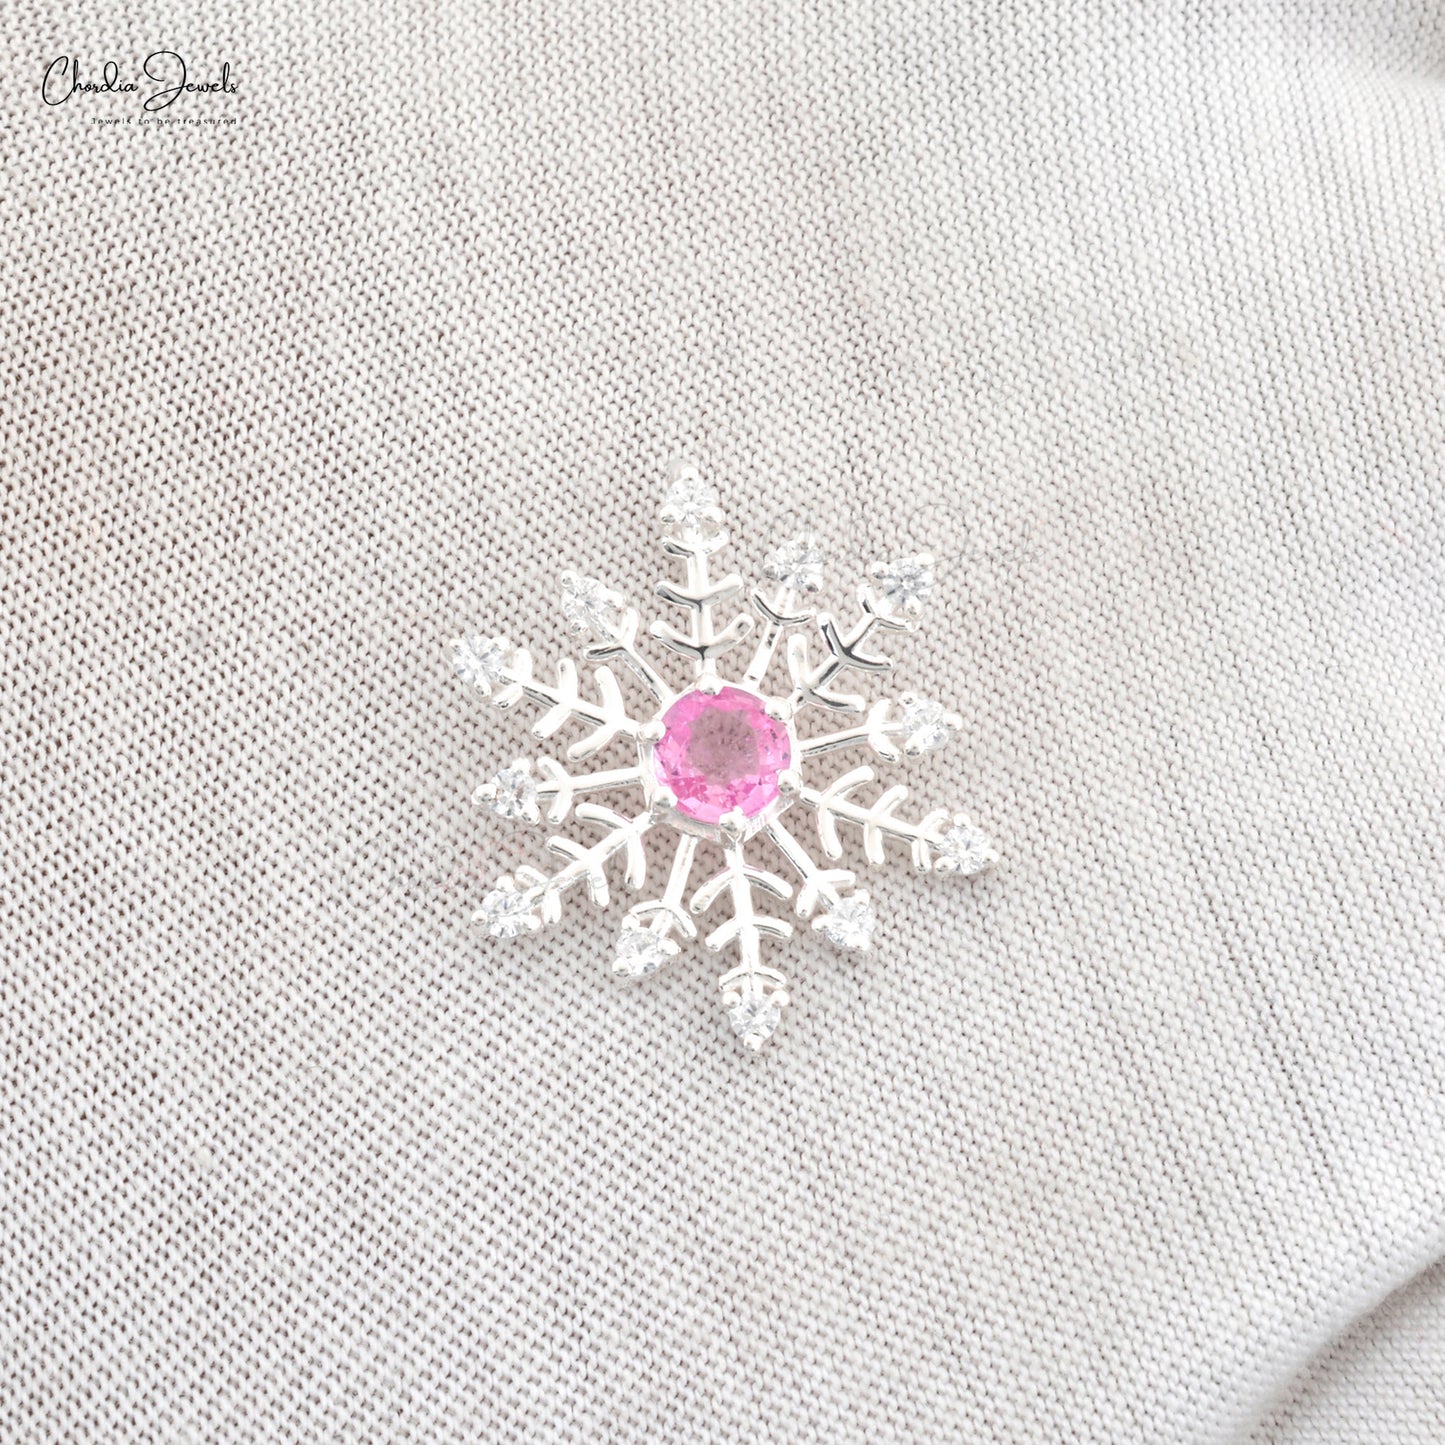 Load image into Gallery viewer, Fine Quality Jewelry At Wholesale Price Pink Sapphire Snow Flake Shaped Pendant with Cubic Zircon in 925 Sterling Silver Pendant
